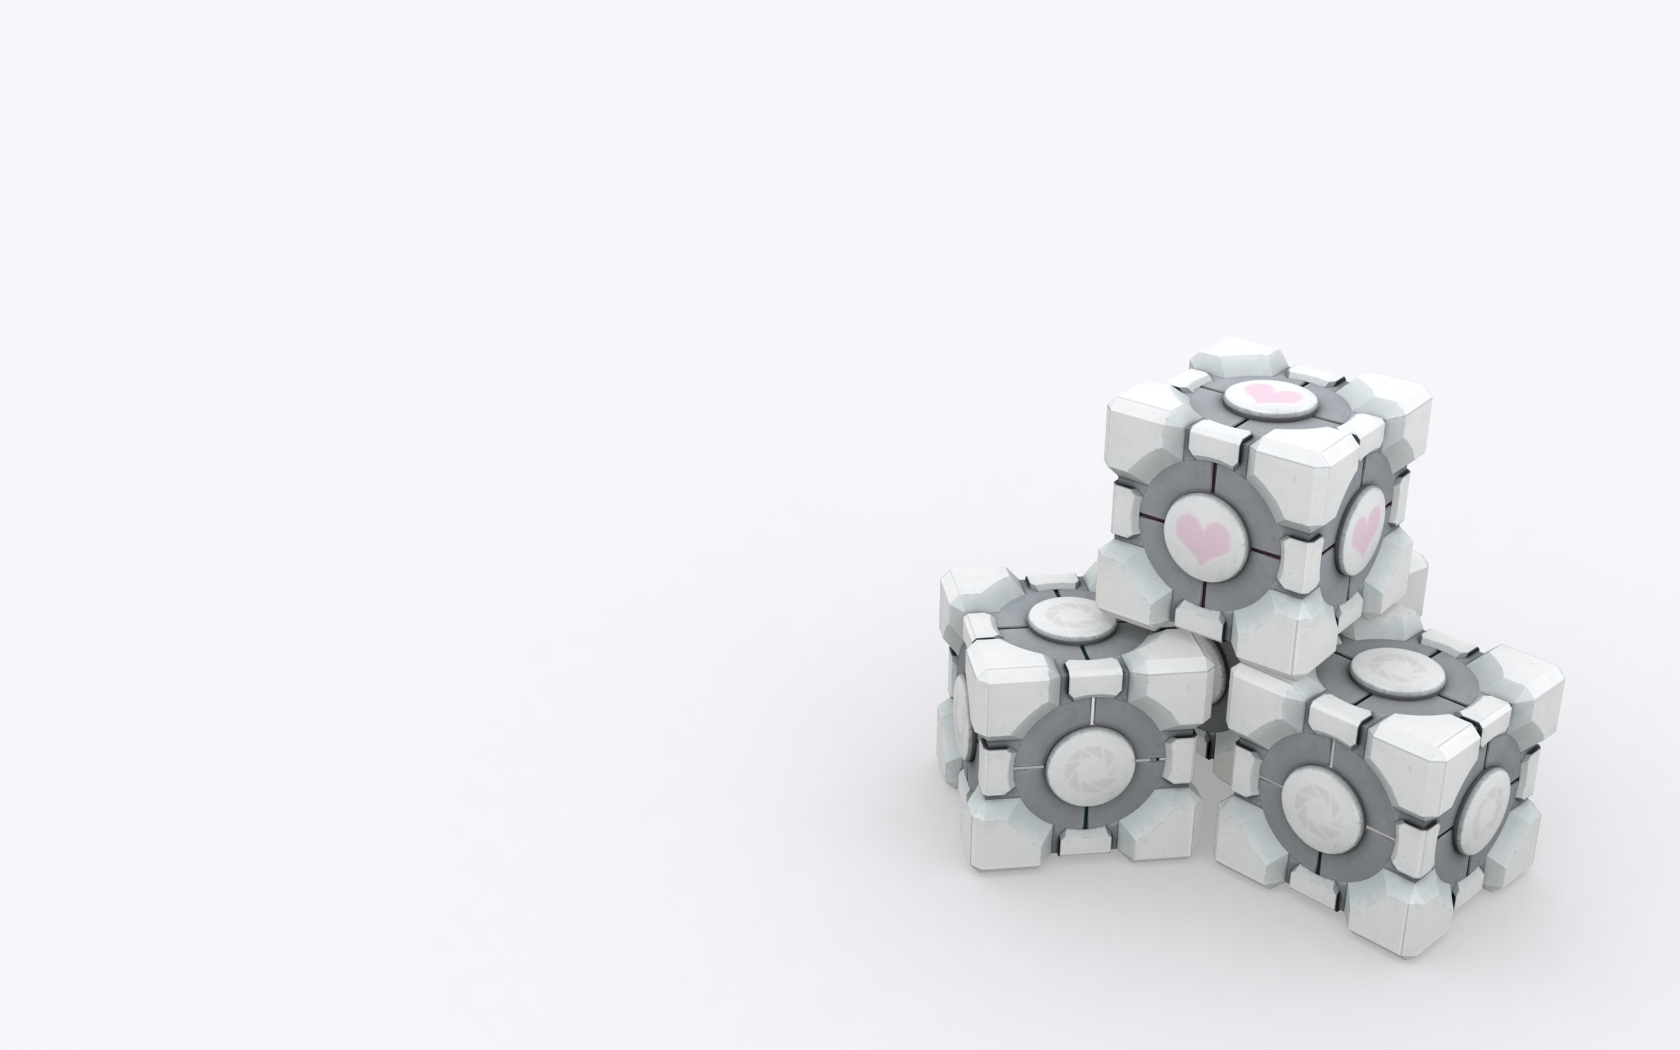 Three colorfully patterned cubes lined up in a row, resembling the Companion Cube from the video game Portal.